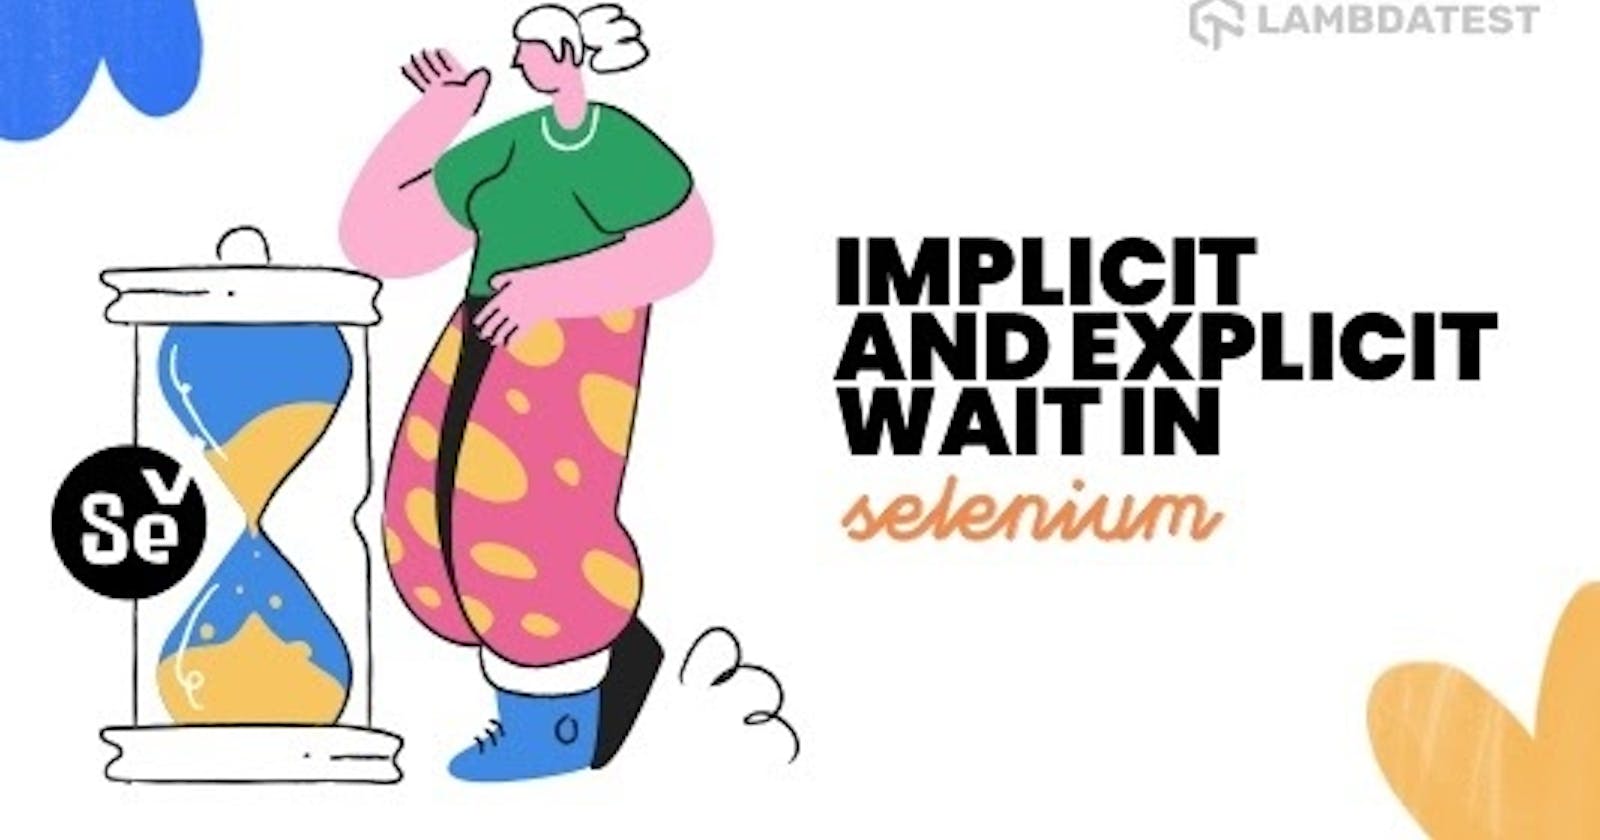 How To Handle Synchronization In Selenium PHP Using Implicit and Explicit Wait?